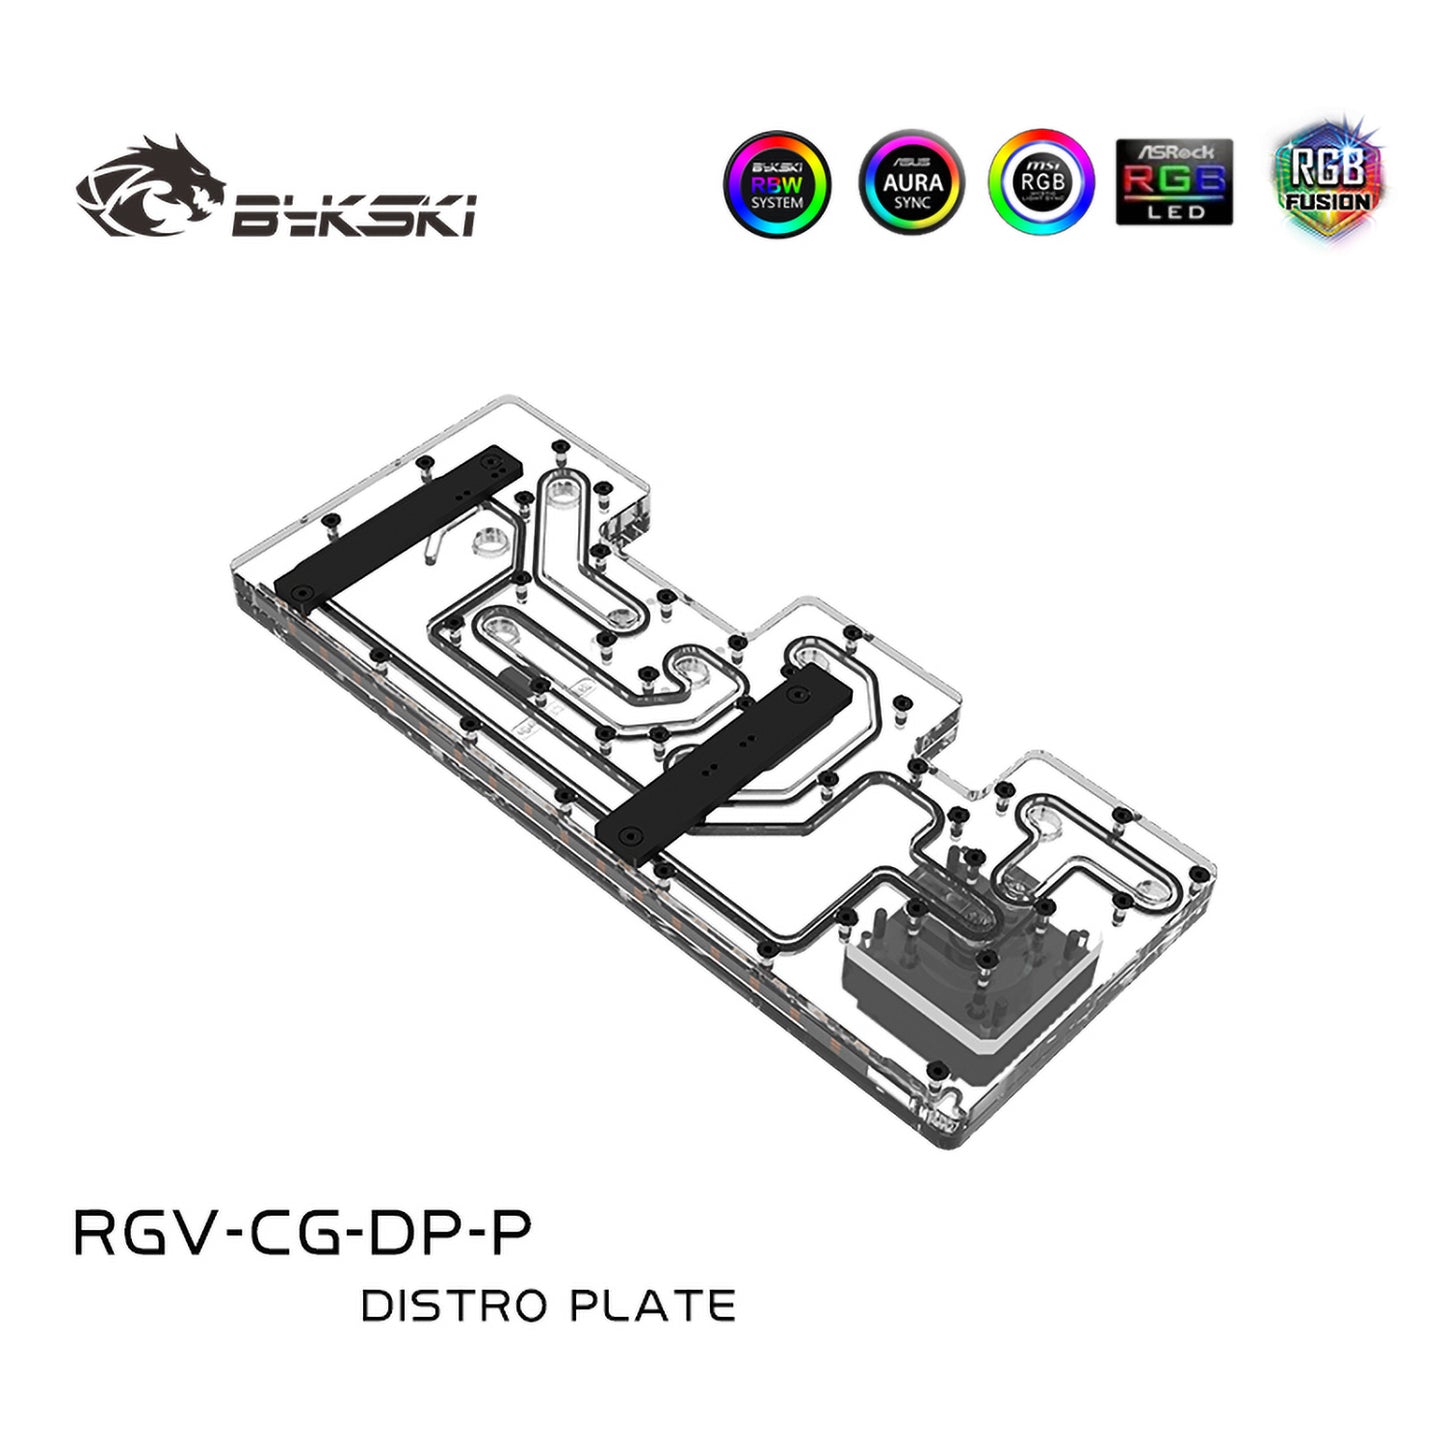 Bykski Distro Plate For Cougar DUOFACE PRO Case, 5V A-RGB Acrylic Waterway Board, Complete Kit For Water Cooling Loop, RGV-CG-DP-P